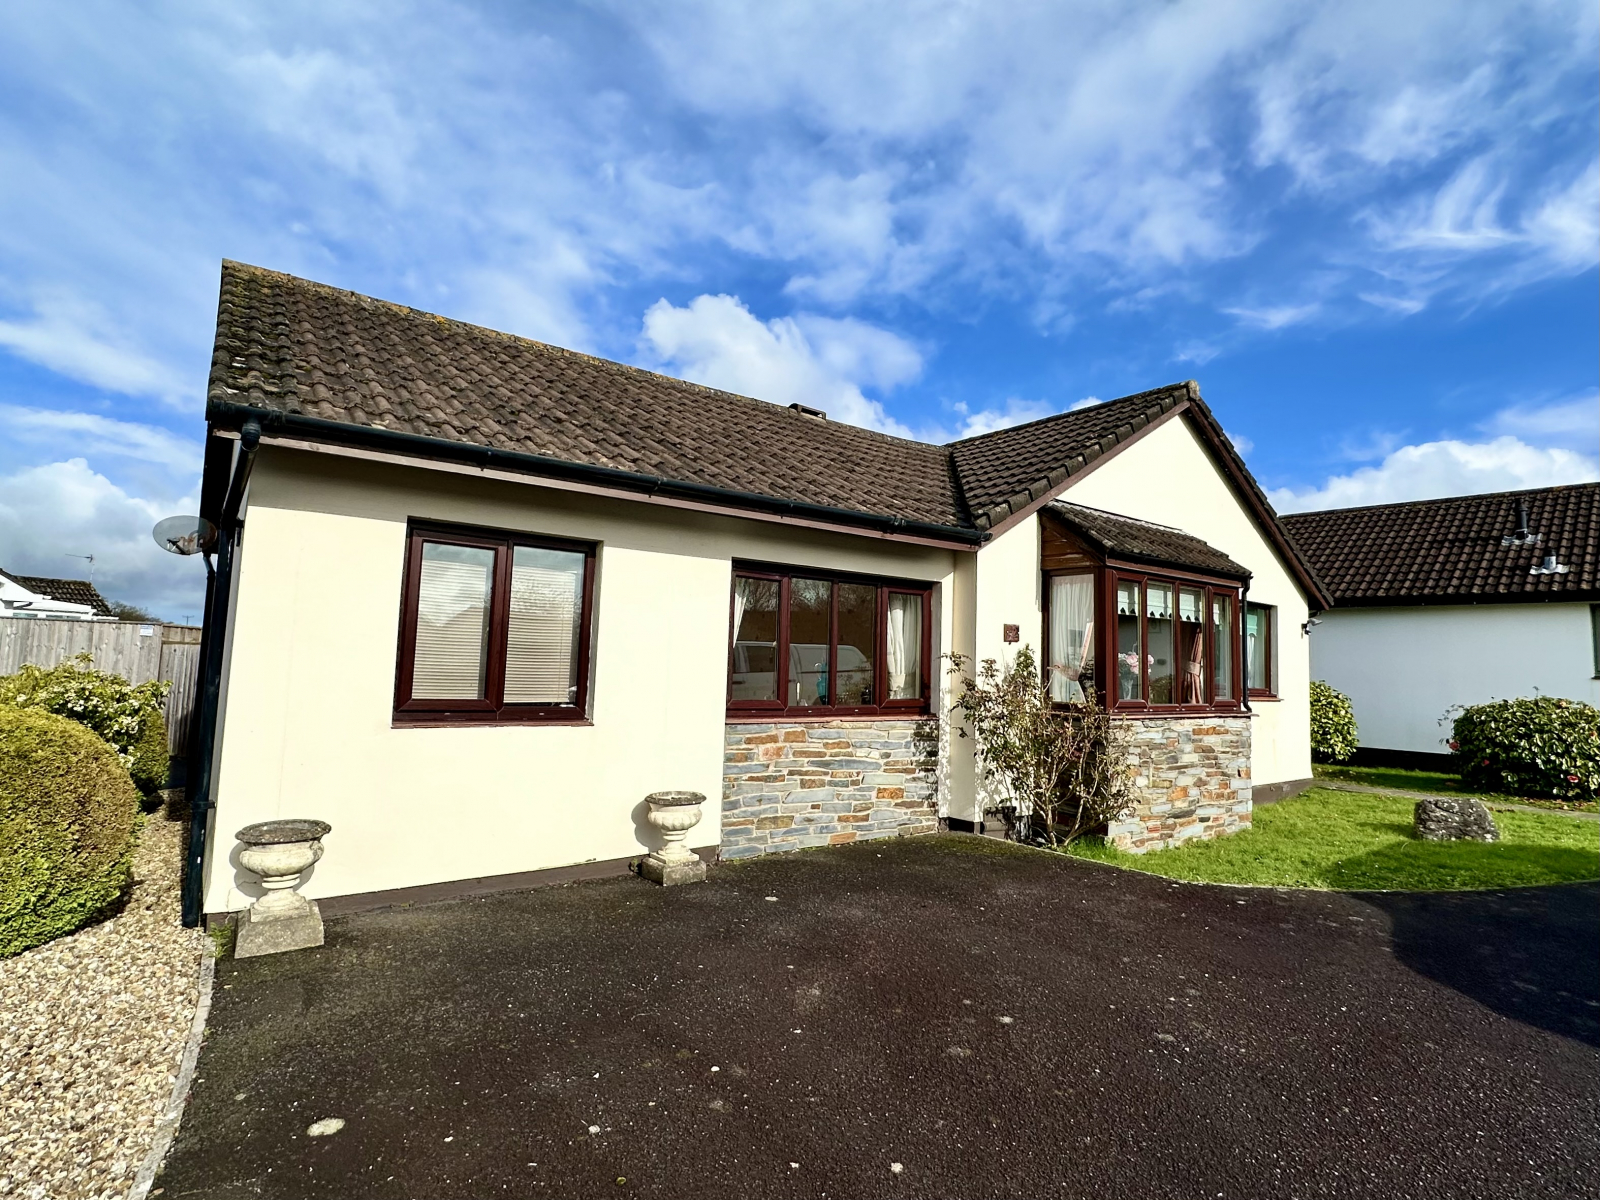 4 bed bungalow for sale in Bickington, Devon - Property Image 1